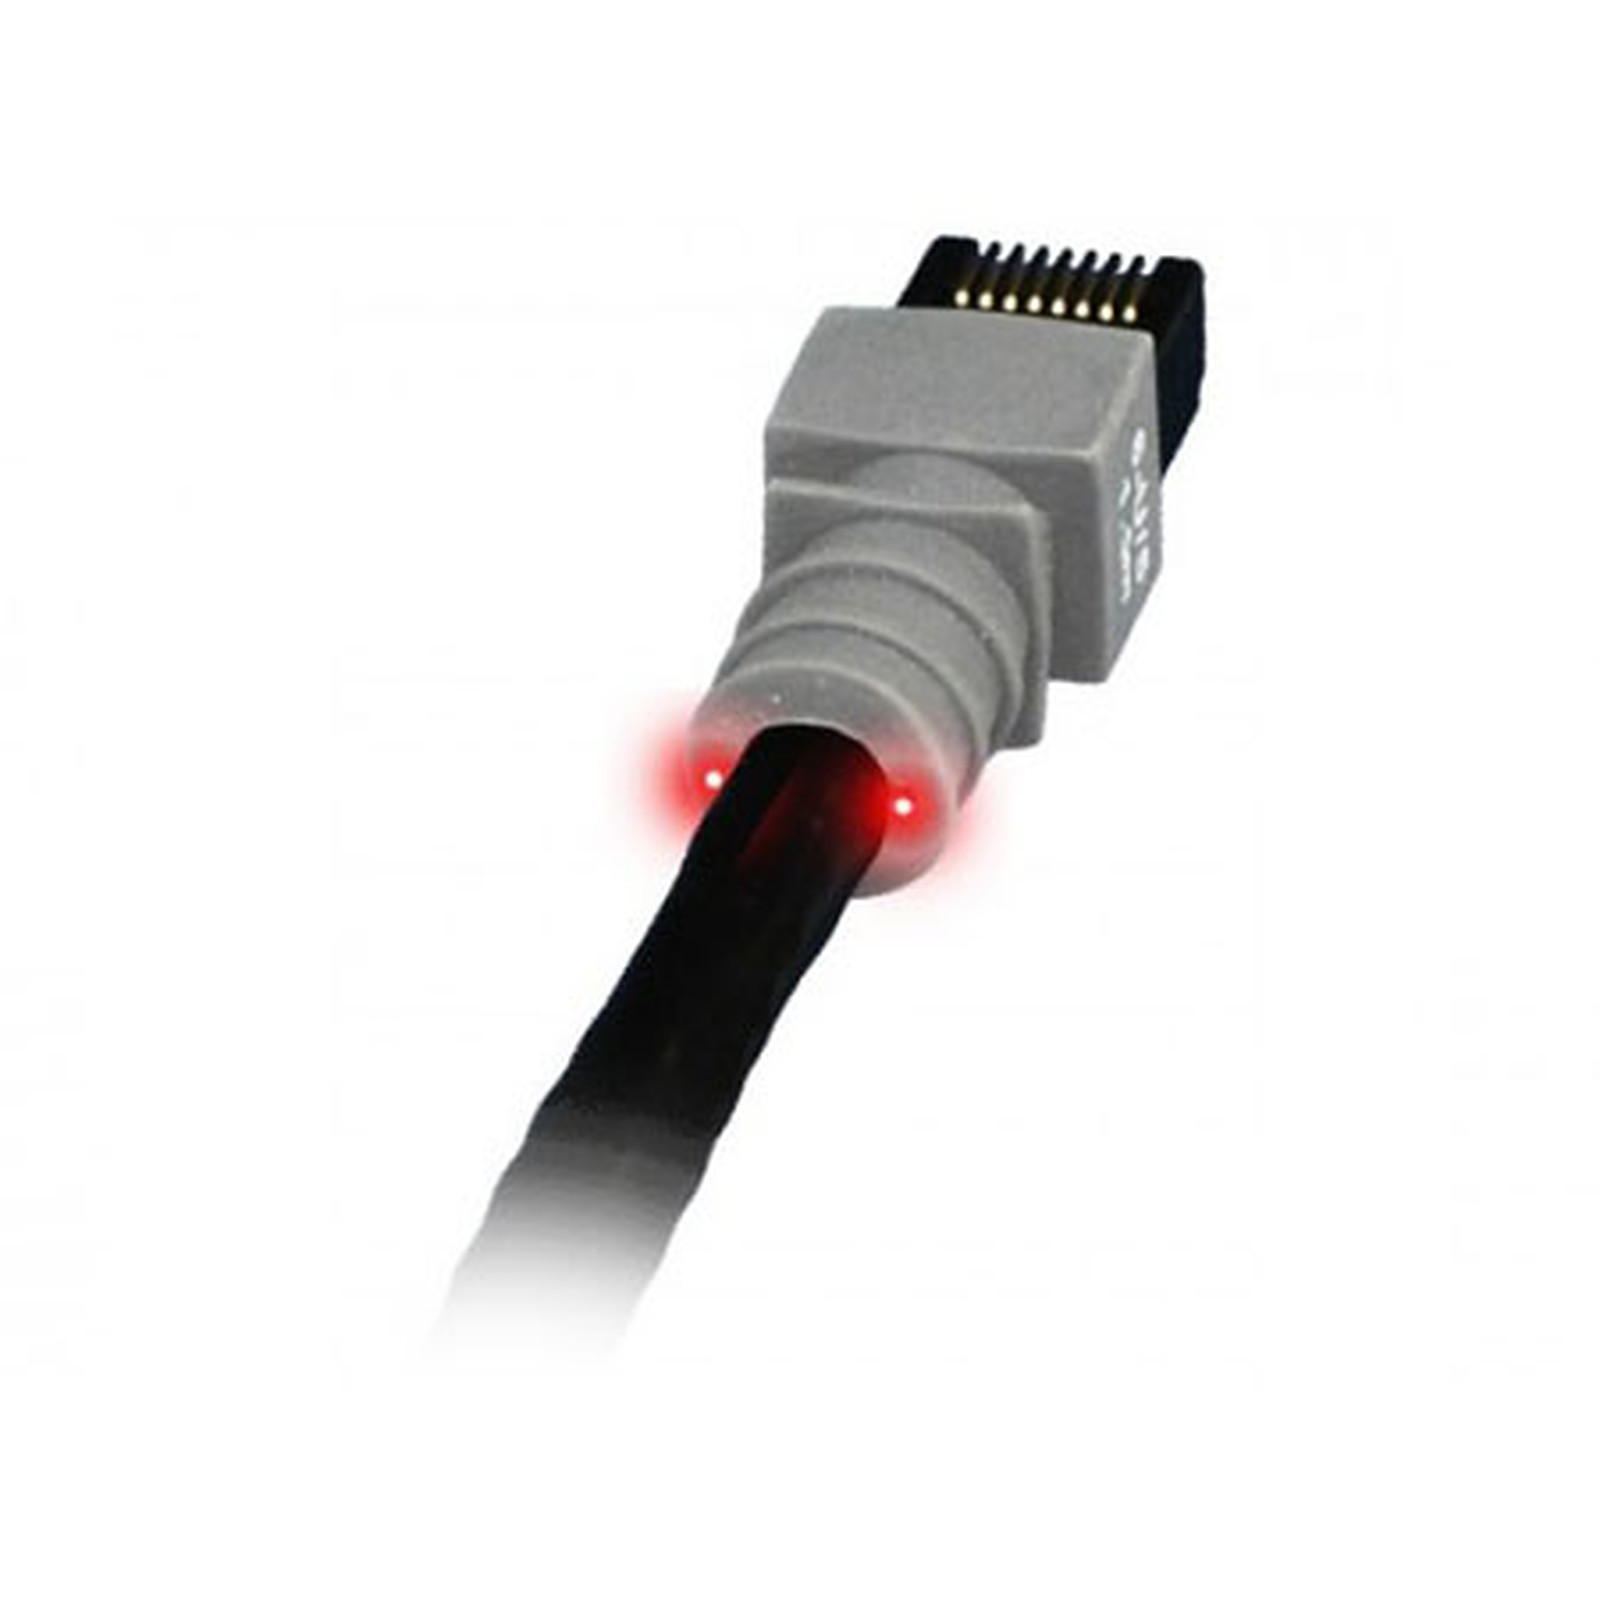 PatchSee cable RJ45 categorie 6 U/UTP (2.1 mètres) - Cable RJ45 PatchSee